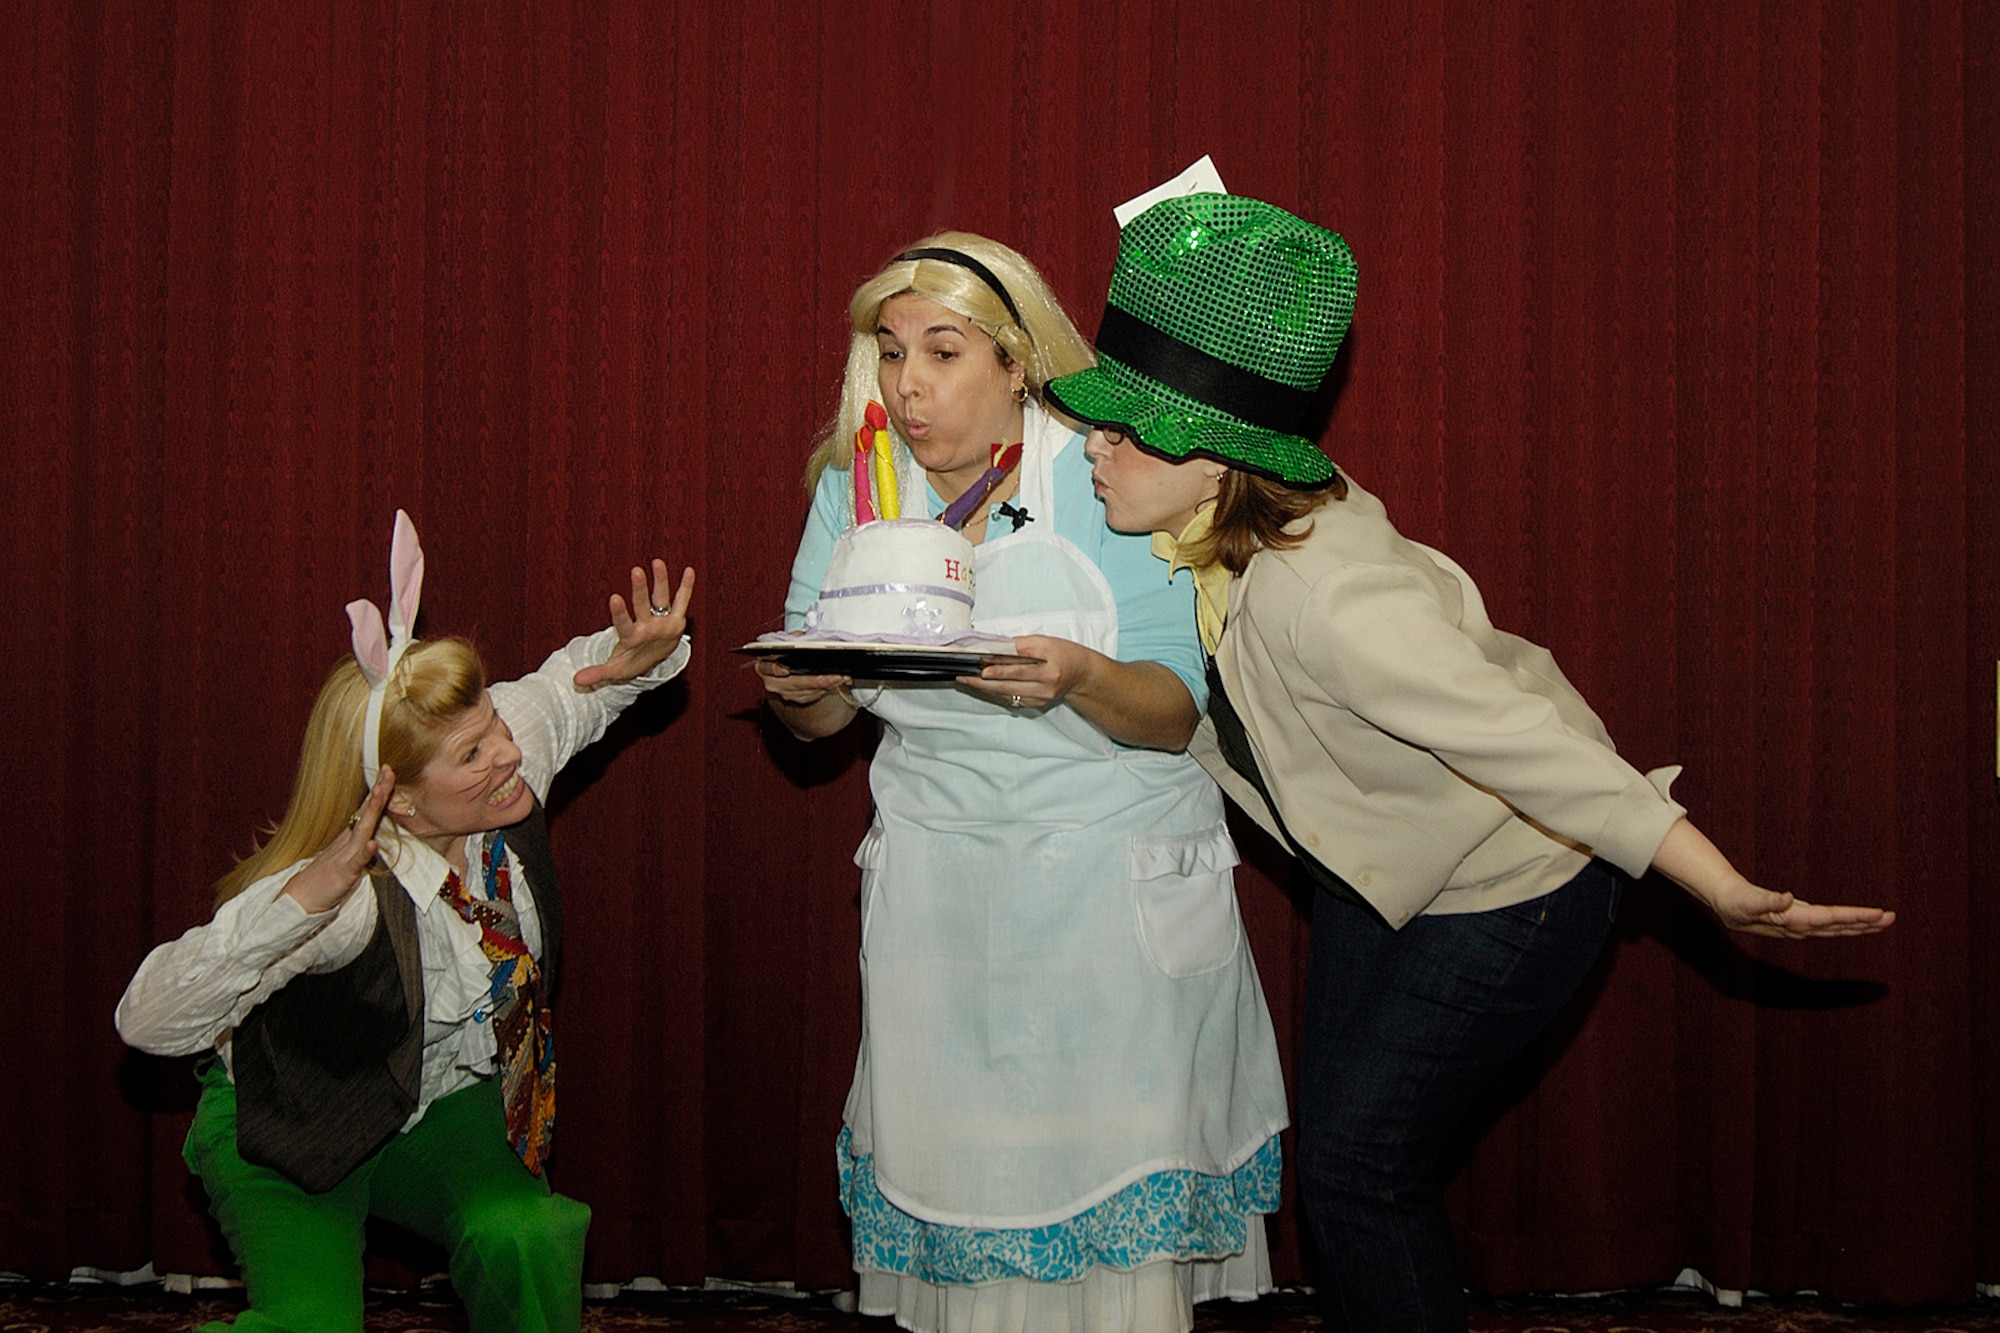 Alice (Larissa Cattles, center) blows out the candles on her ‘unbirthday’ cake at the Hanscom Spouses Club’s Mad Hatter Tea Party, with help from the March Hare (Karen Jenkins, left) and the Mad Hatter (Cynthia Nunes-Taijeron). The tea party was held April 17, at the Minuteman Club.  (Air Force photo by Linda LaBonte-Britt)